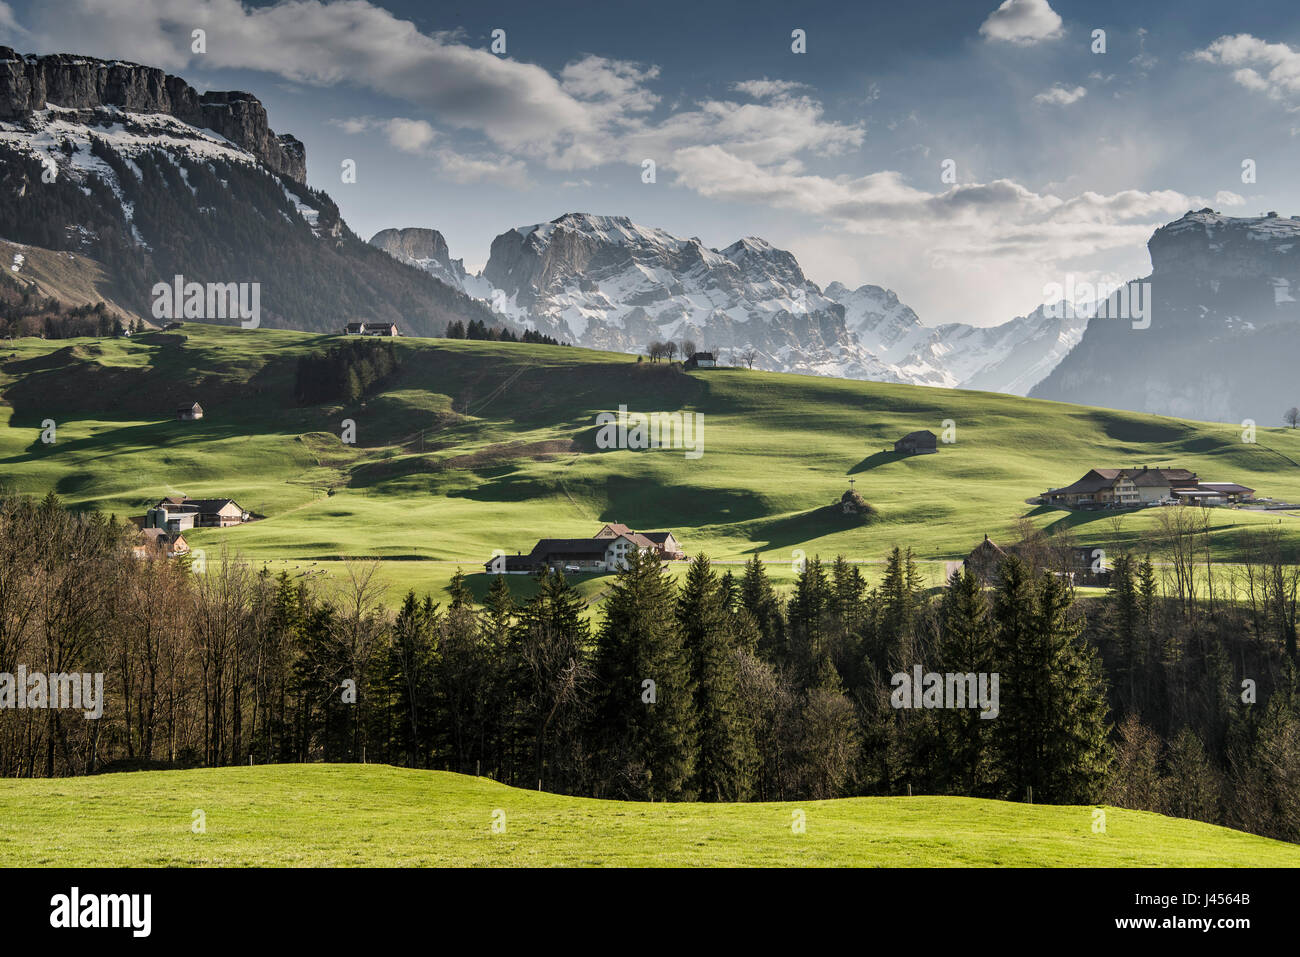 View of the rural landscape of the area surrounding the Swiss town of Appenzell, Switzerland. Derek Hudson / Alamy Stock Photo Stock Photo